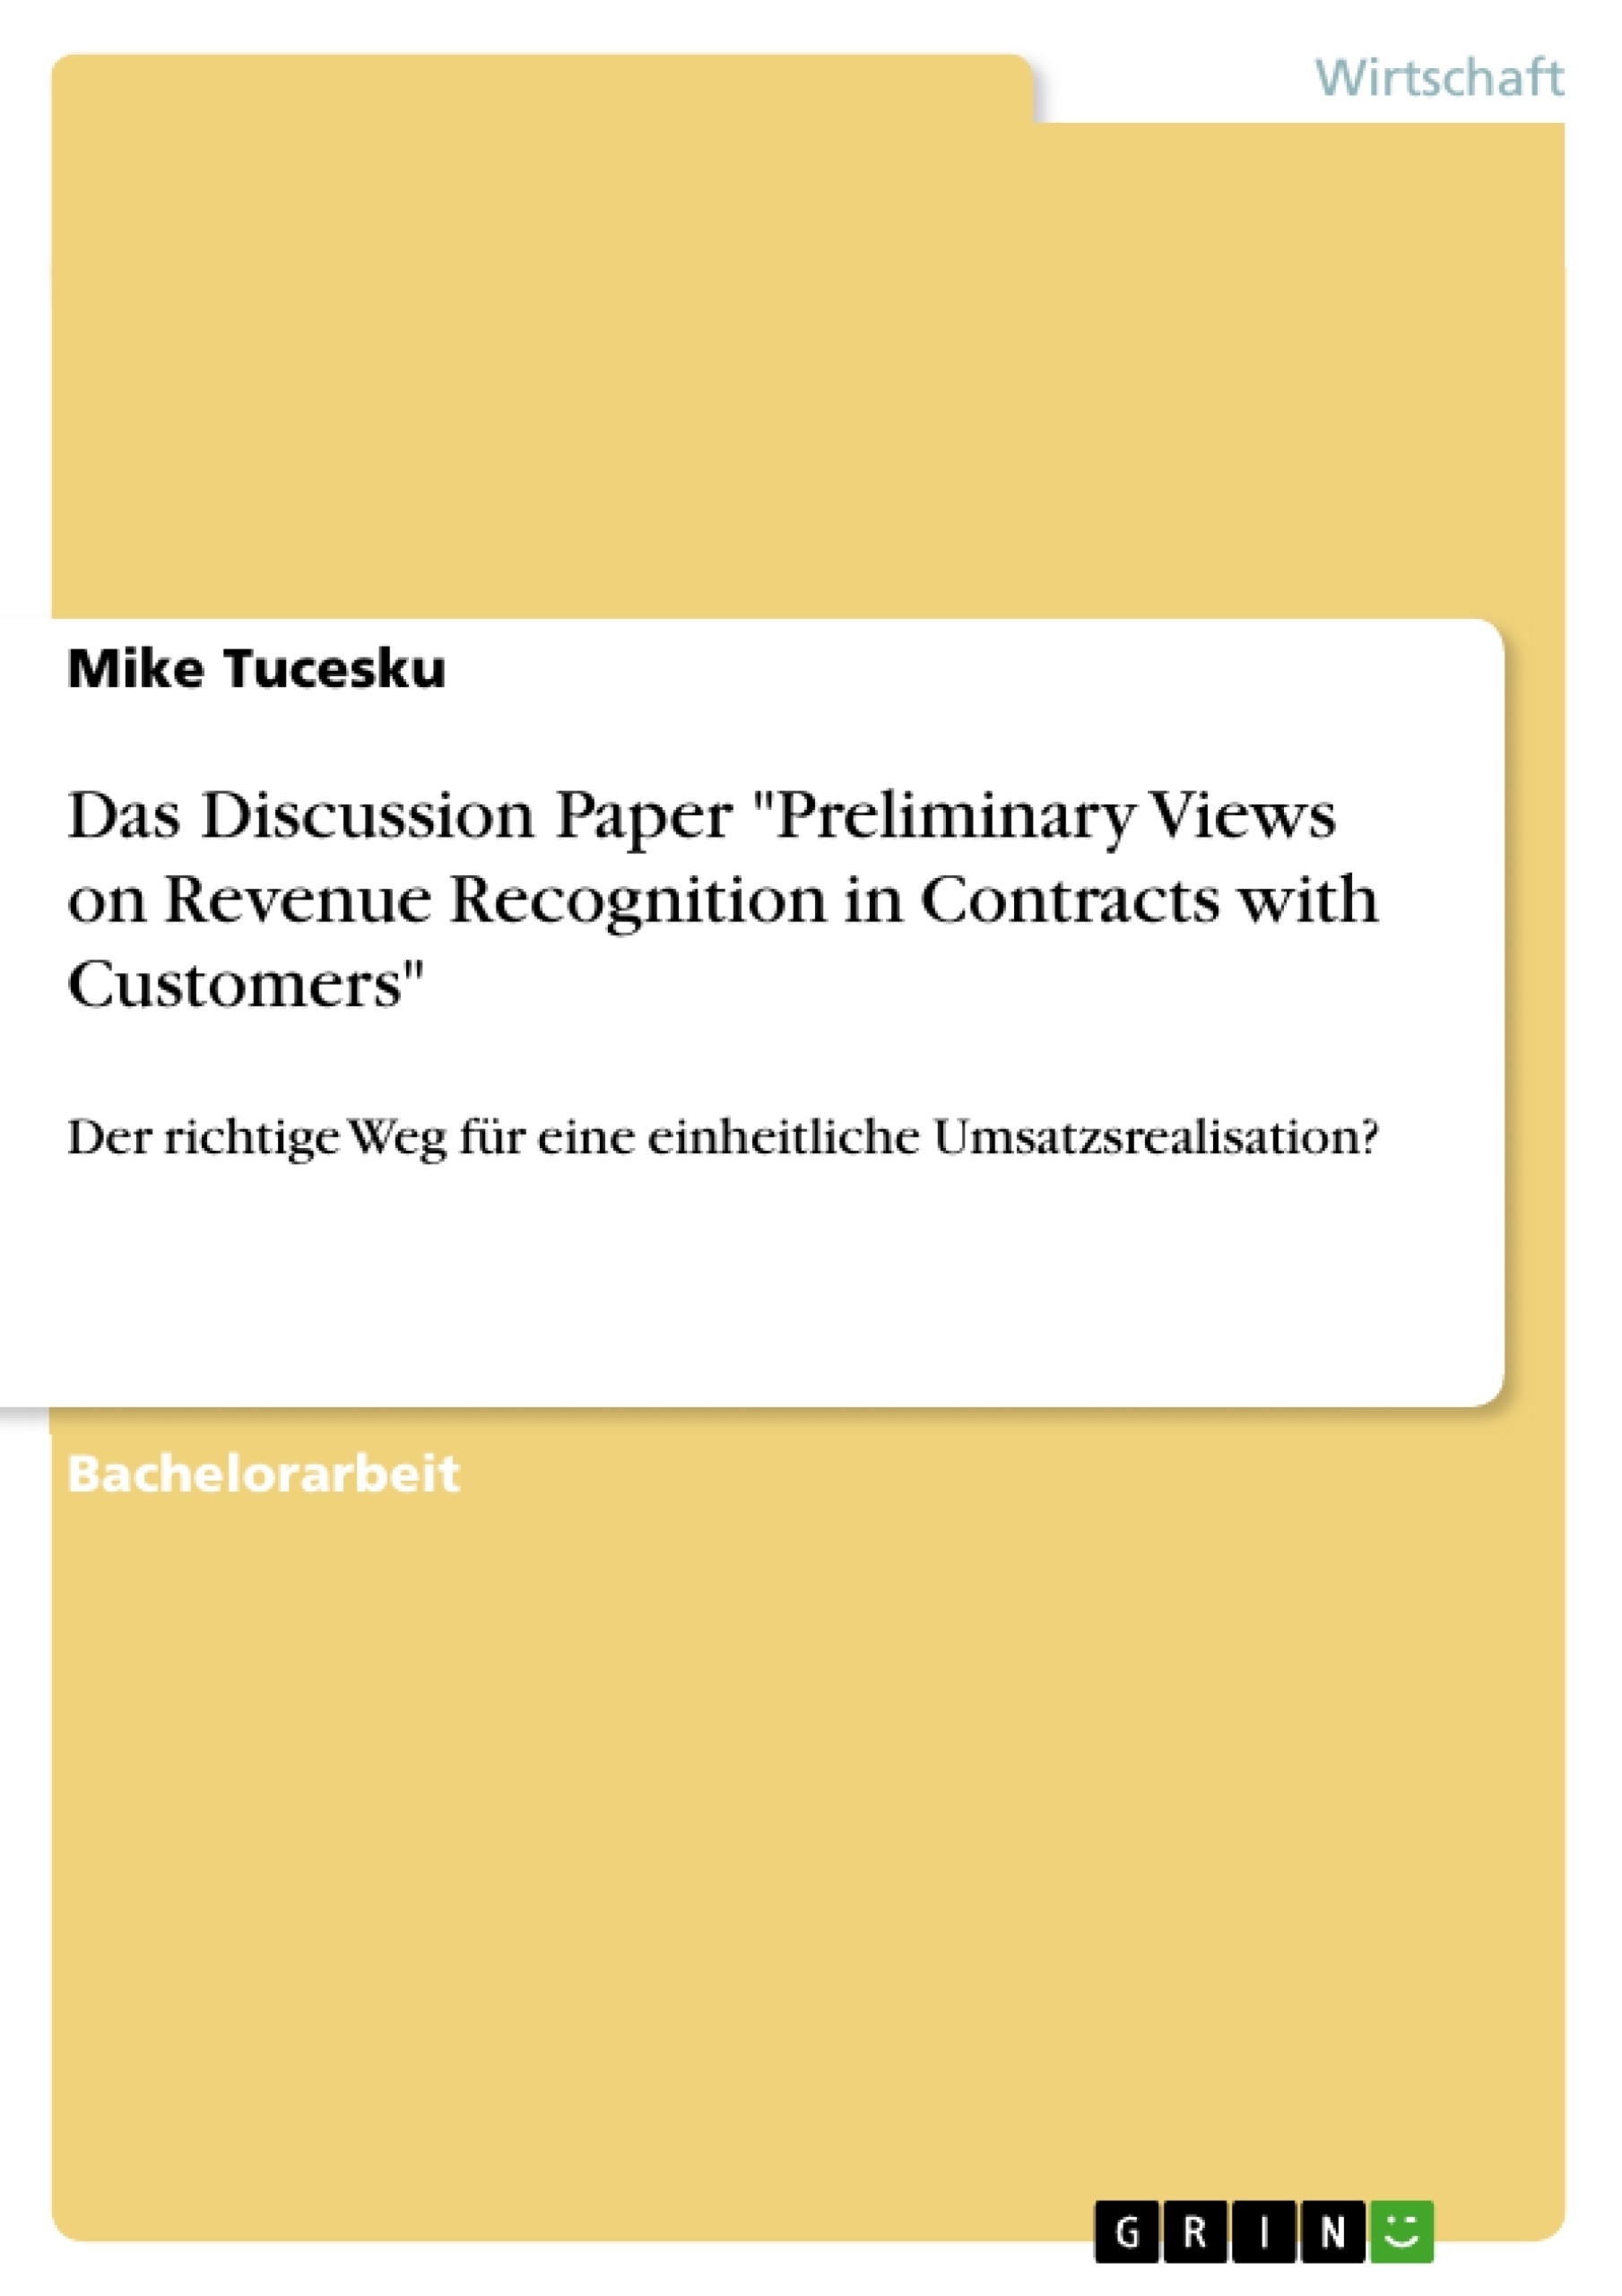 Titel: Das Discussion Paper  "Preliminary Views on Revenue Recognition in Contracts with Customers"